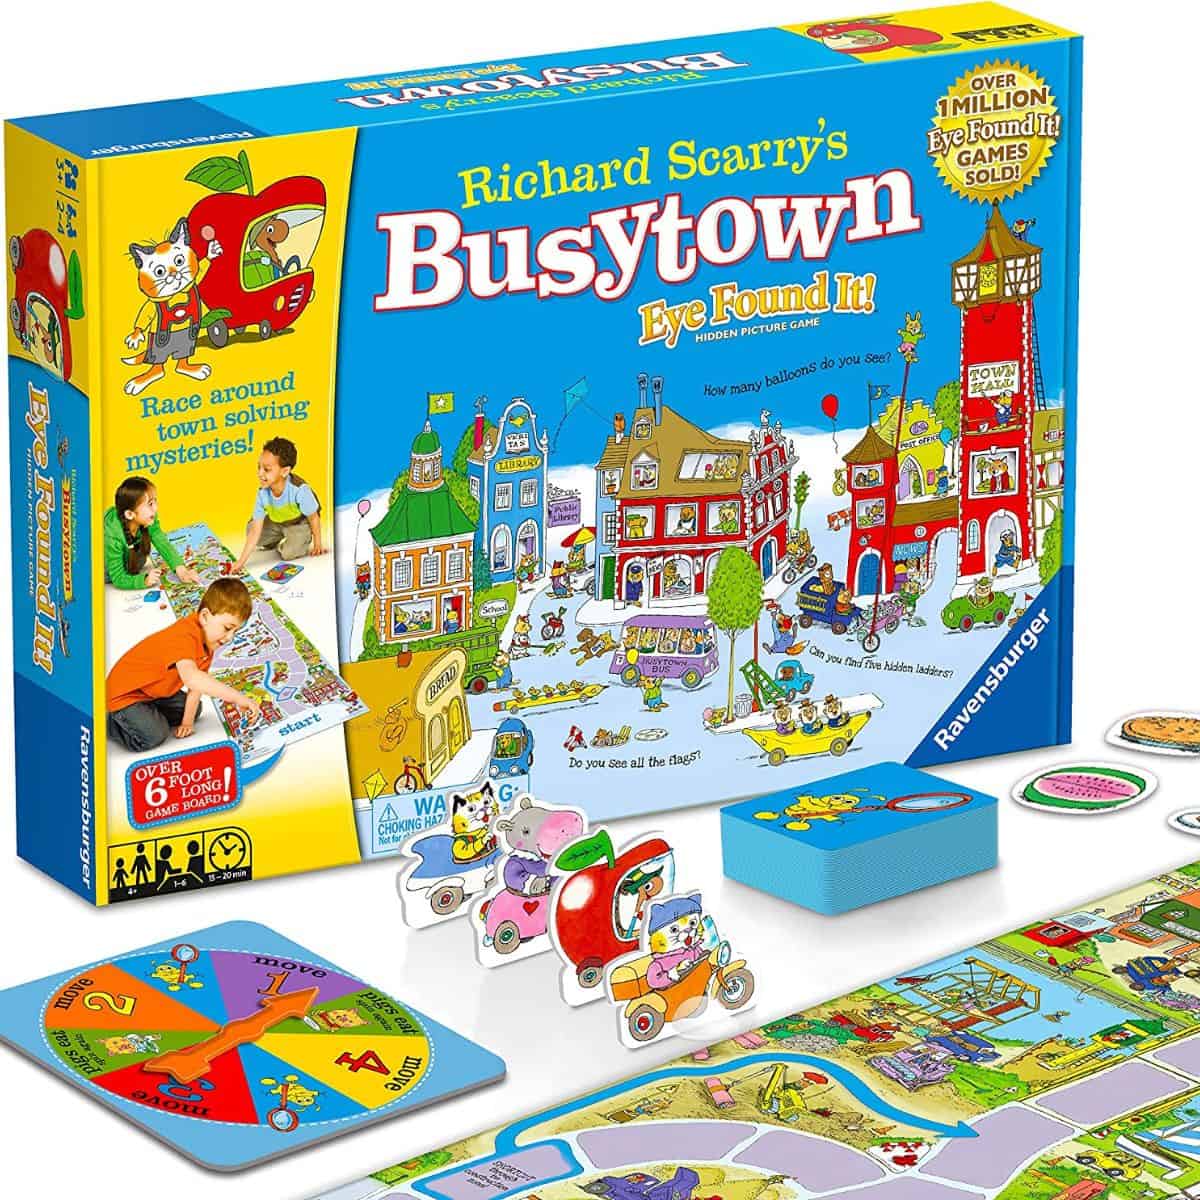 A Richard Scarry's Busytown, Eye Found It game box and pieces.